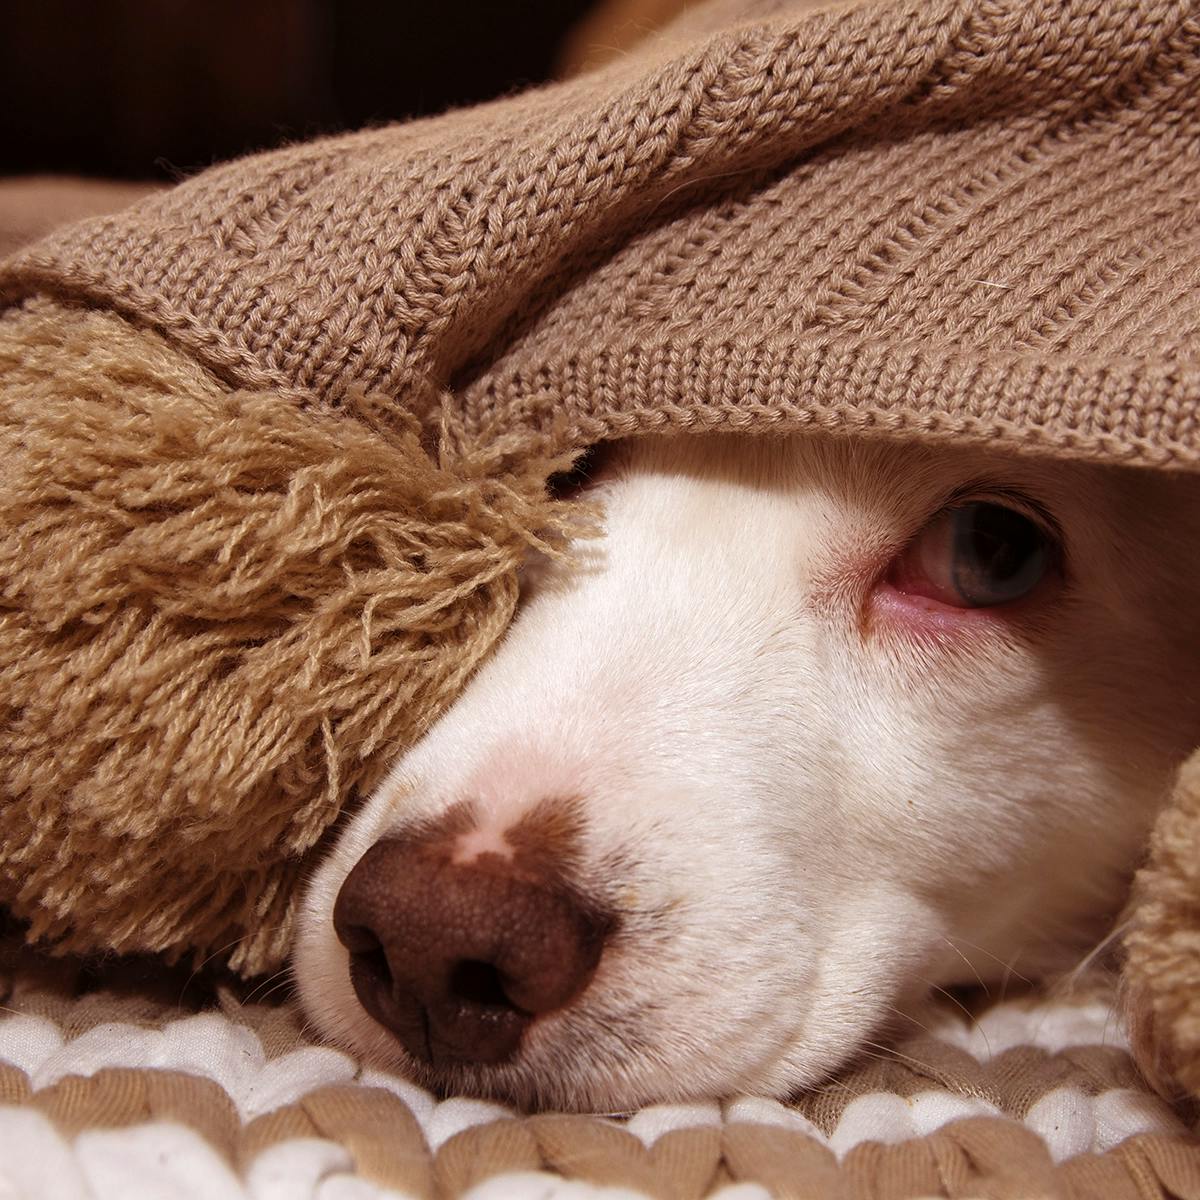 Dog hiding under a blanket with just his nose showing, illustrating a way of dealing with holiday stress.